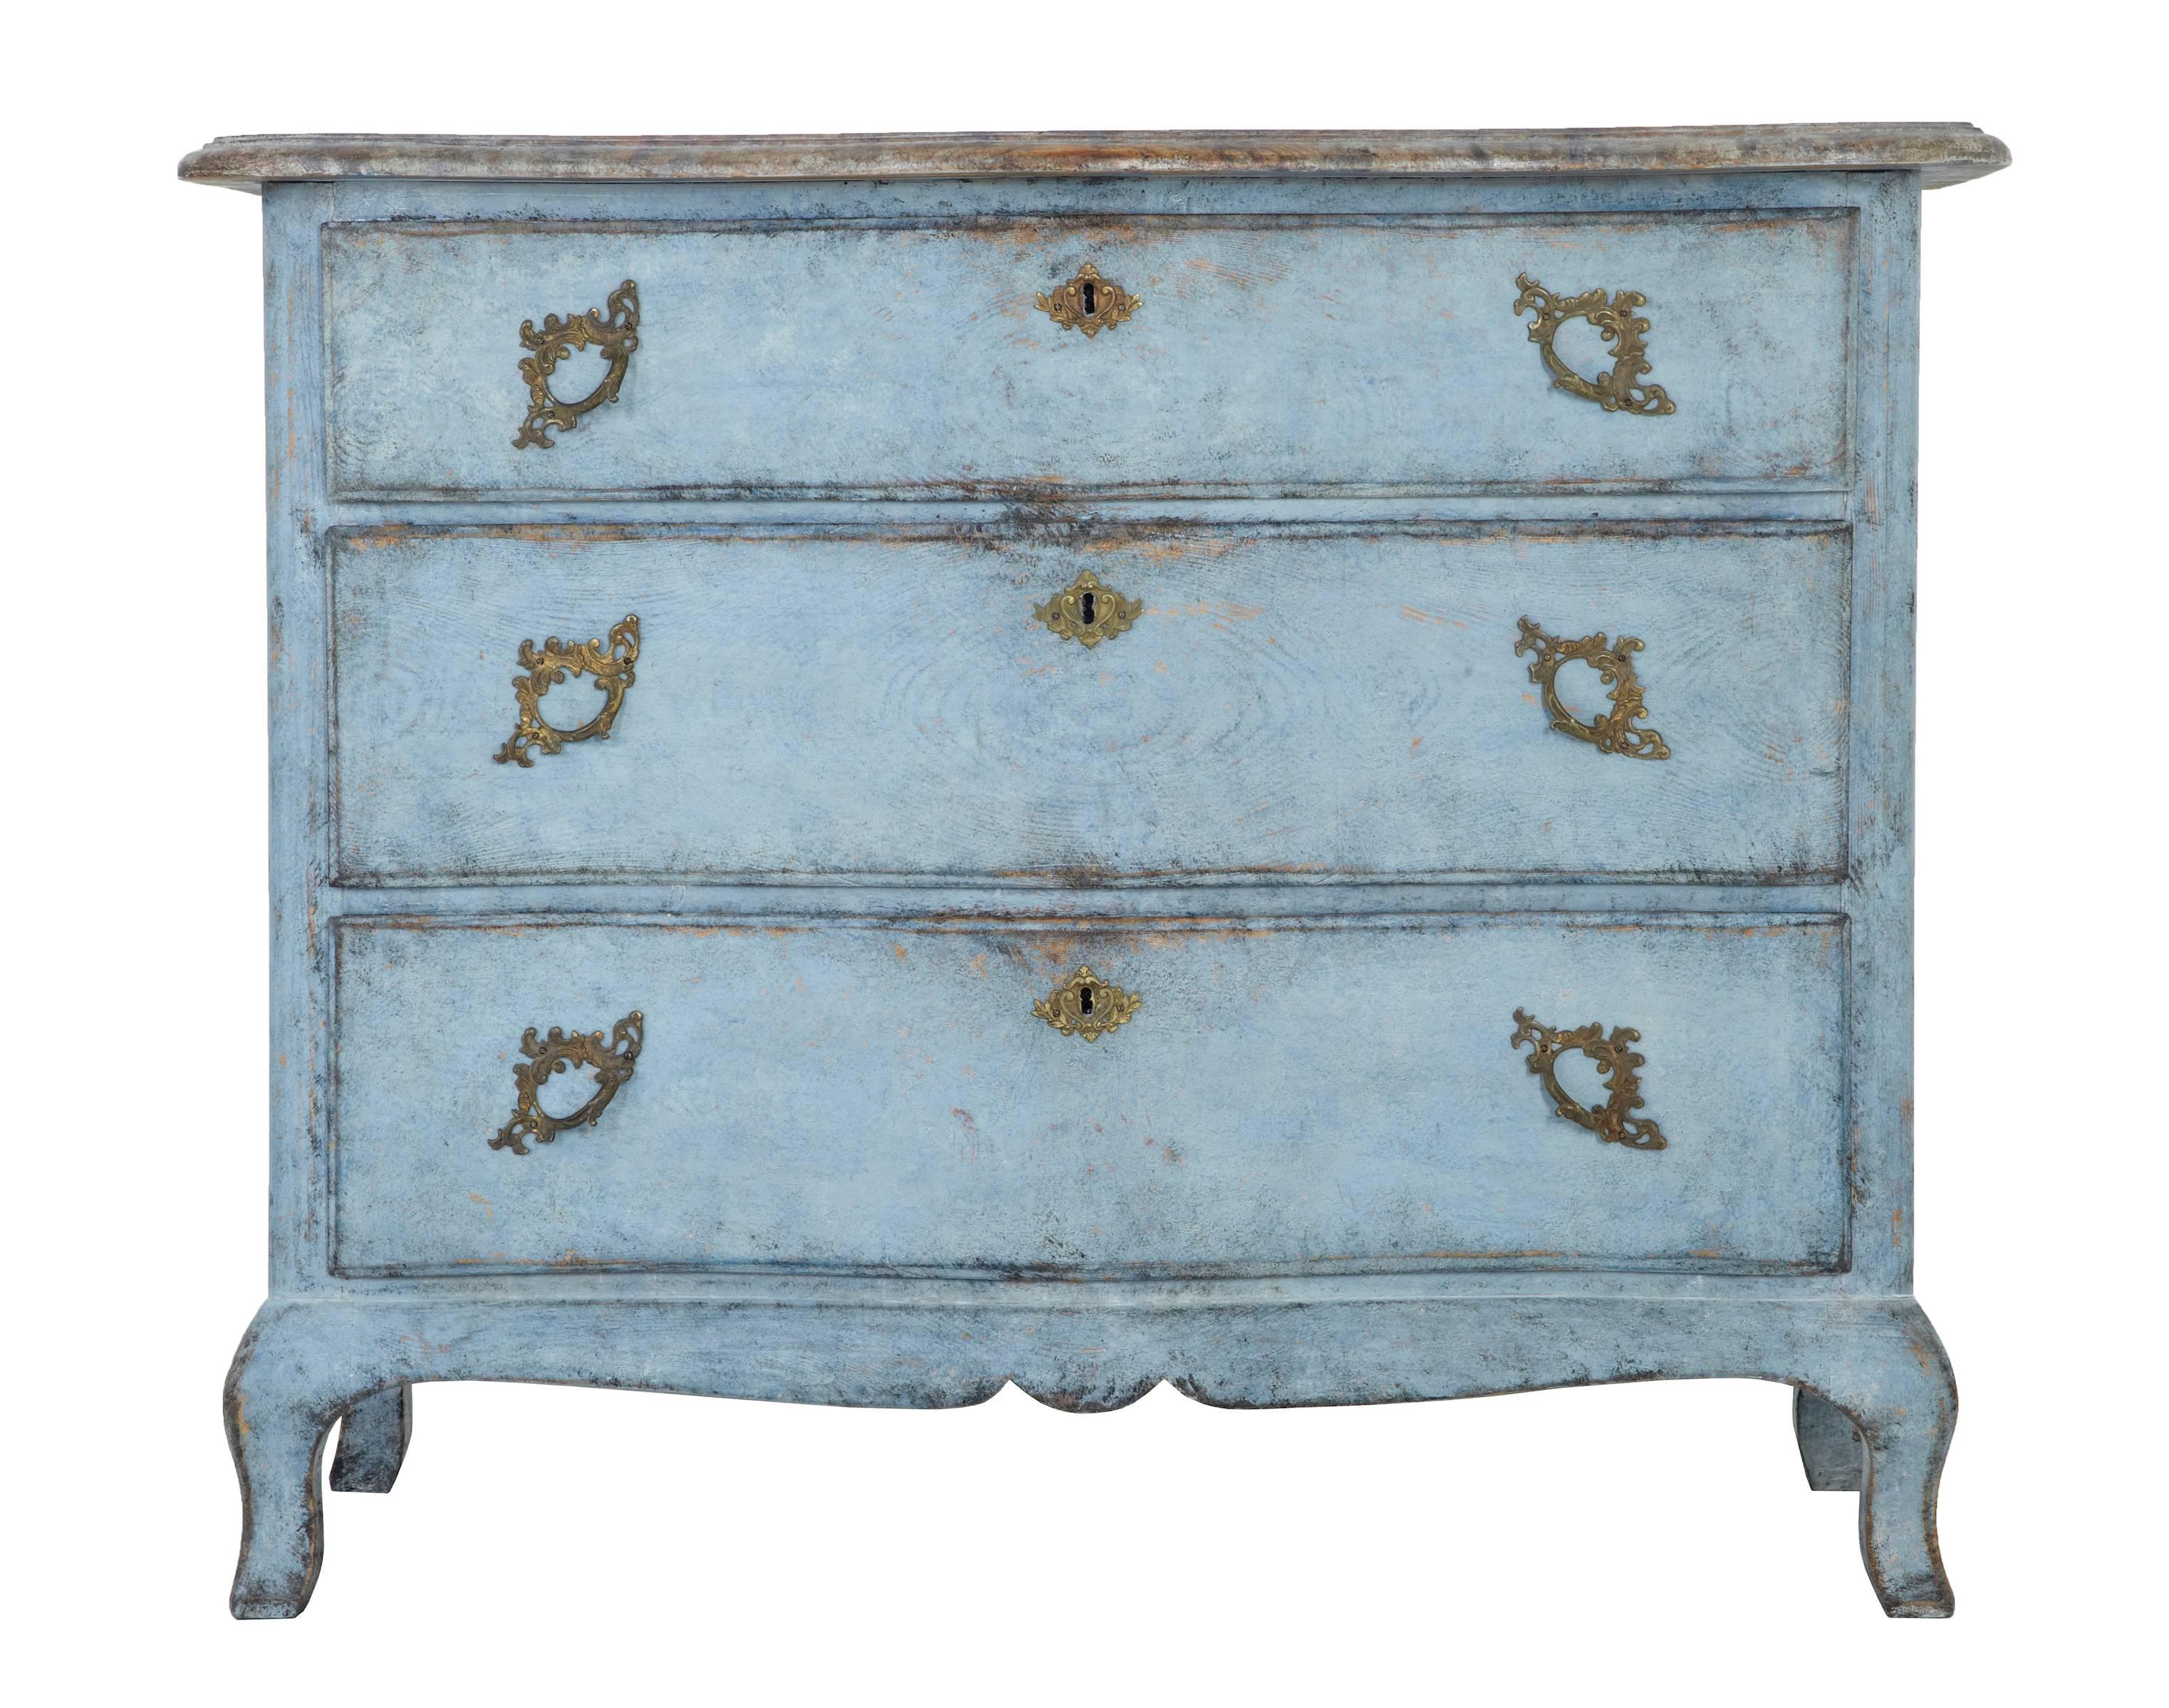 Three-drawer serpentine shaped Swedish commode in later blue paint and faux marble top, circa 1880.
Weathered paint which shows the grain in the pine drawer fronts.
Ornate handles and escutheons.

Measures: Height 32